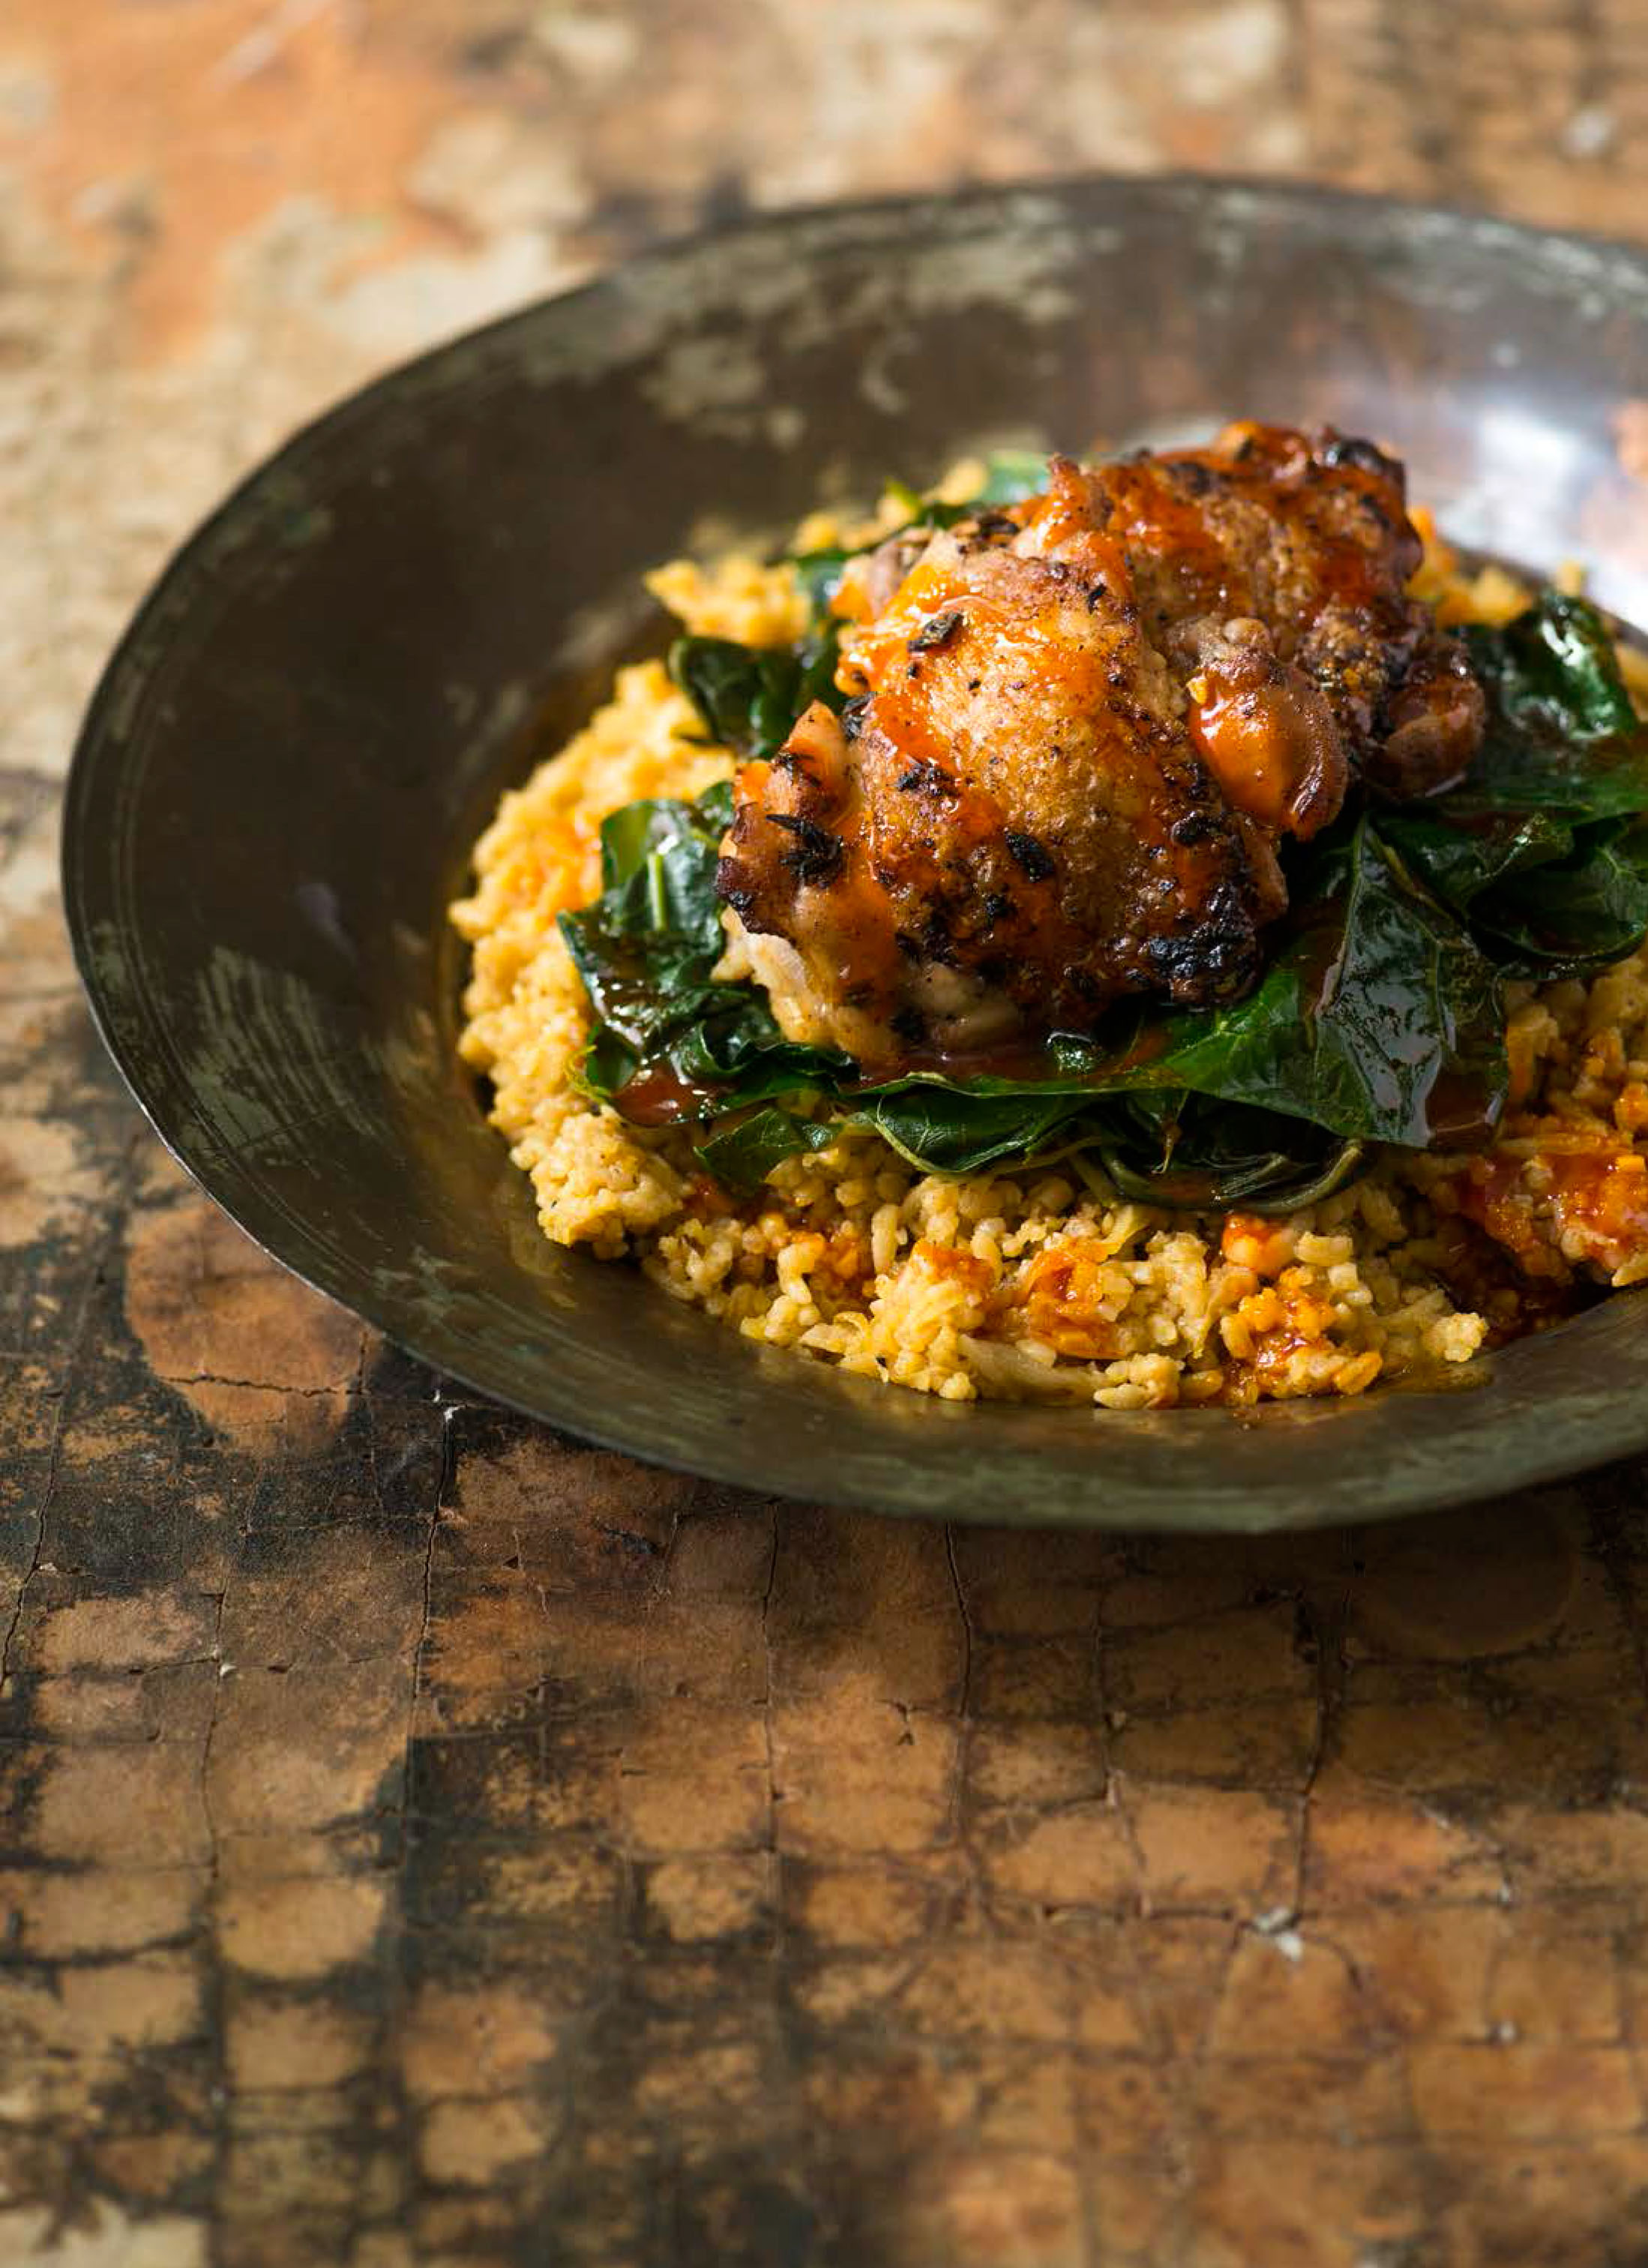 A bowl of chicken thighs atop sauteed greens and rice.